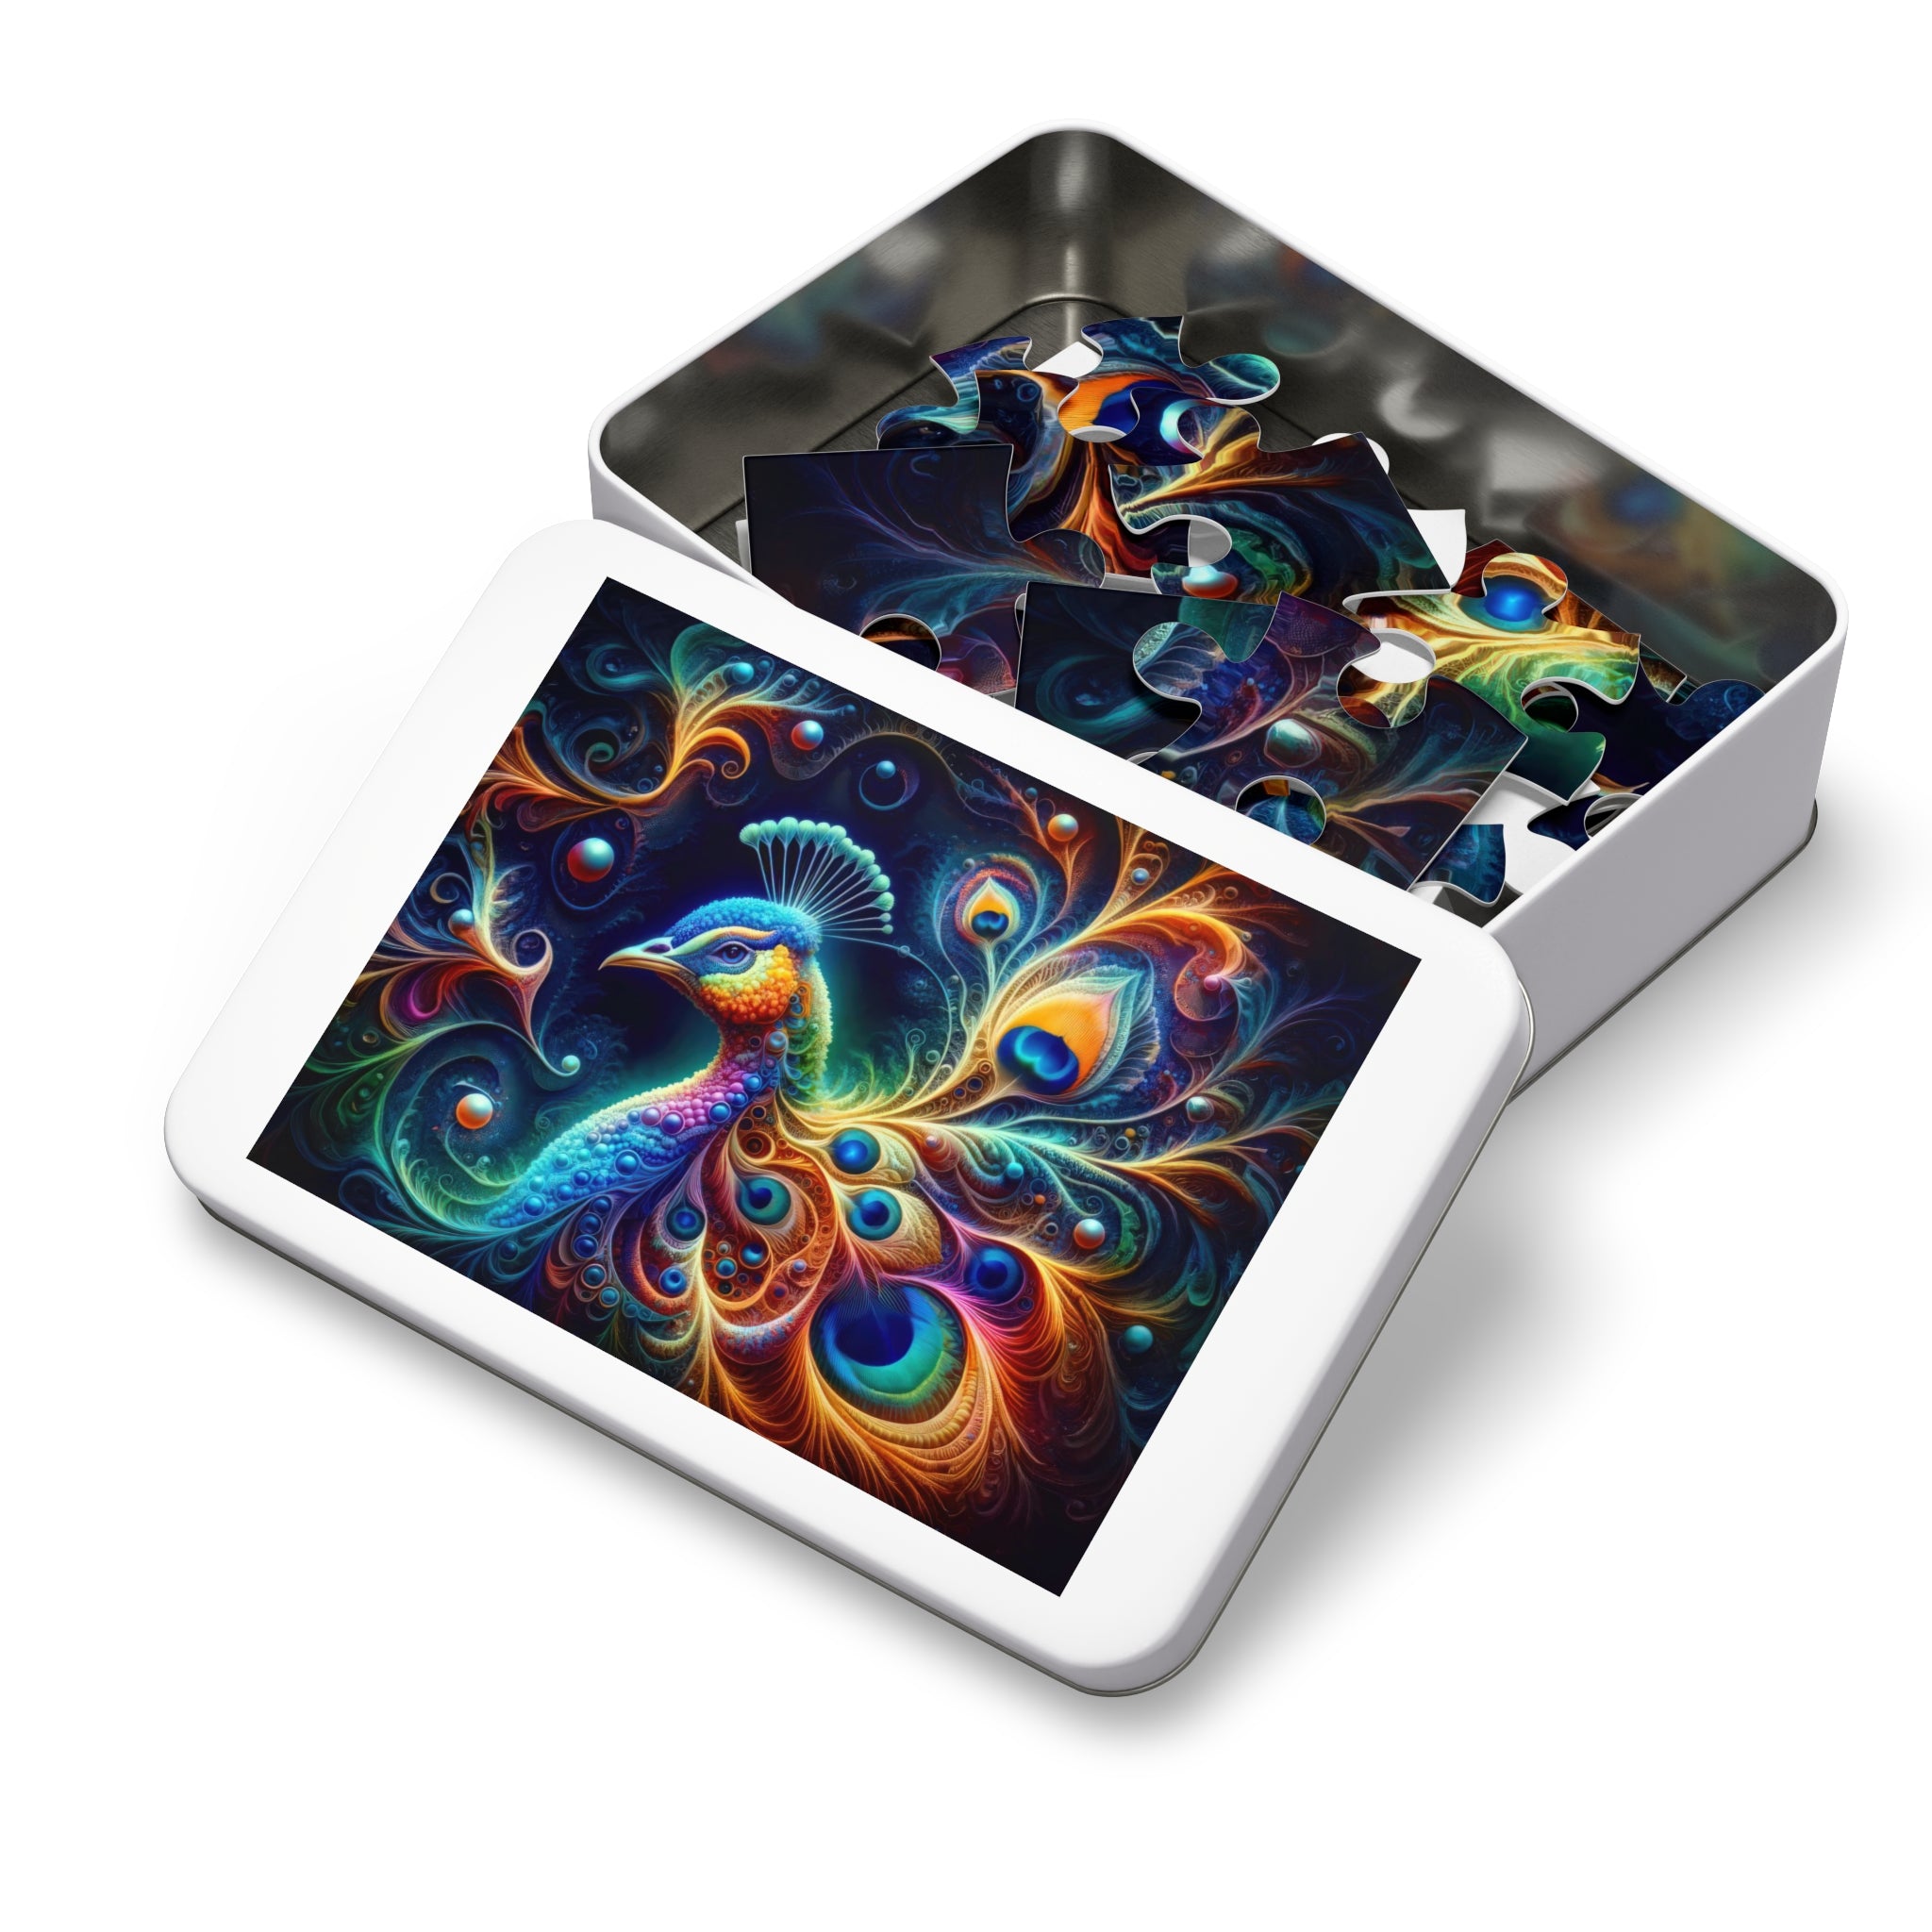 Cosmos Quill Symphony Jigsaw Puzzle